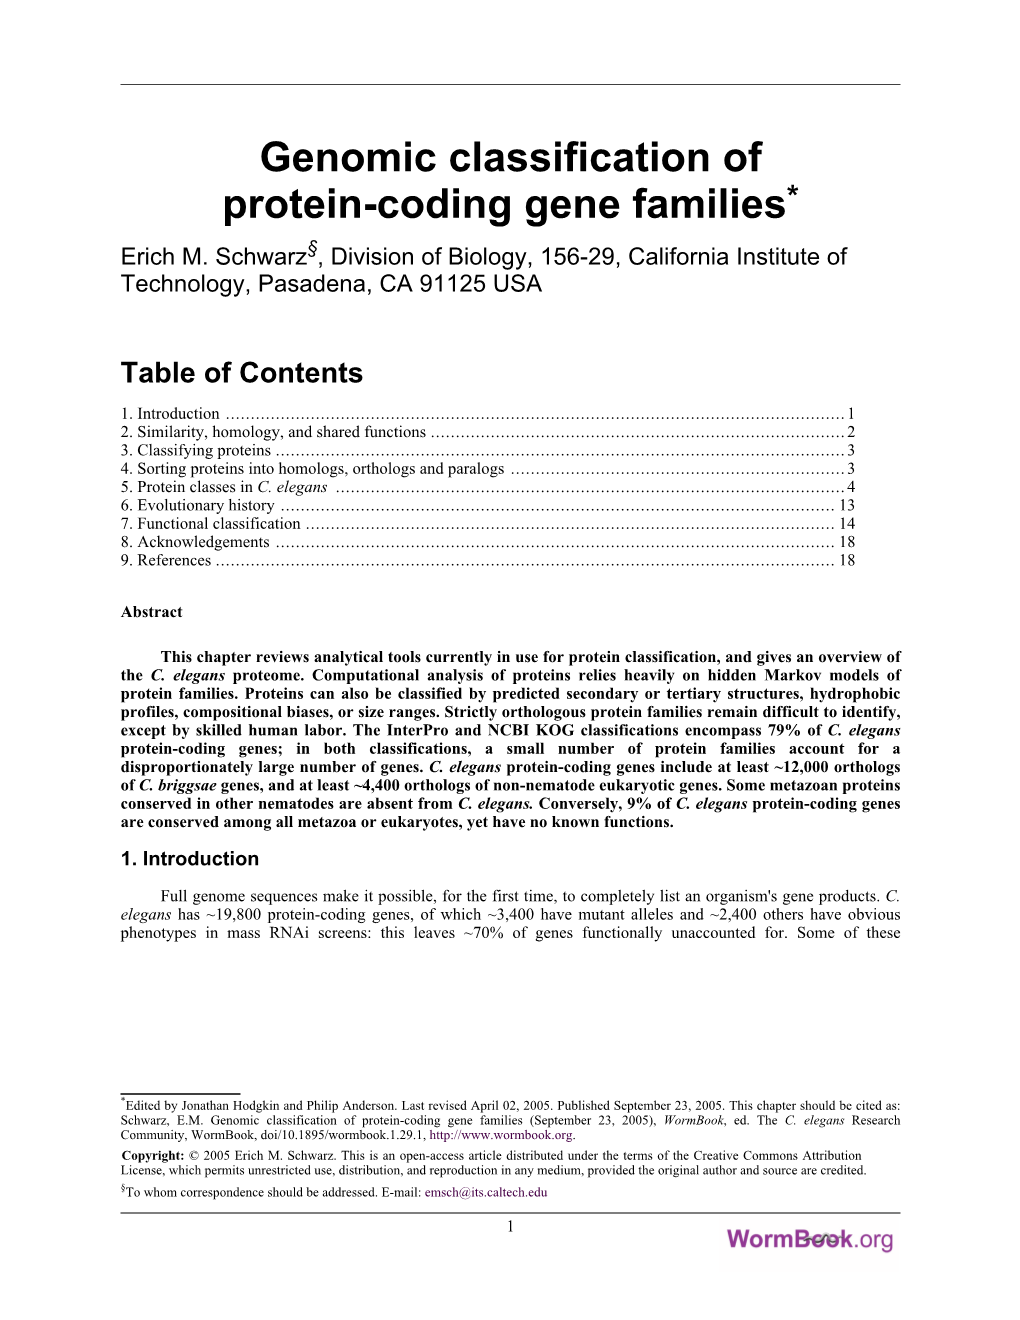 Genomic Classification of Protein-Coding Gene Families* Erich M